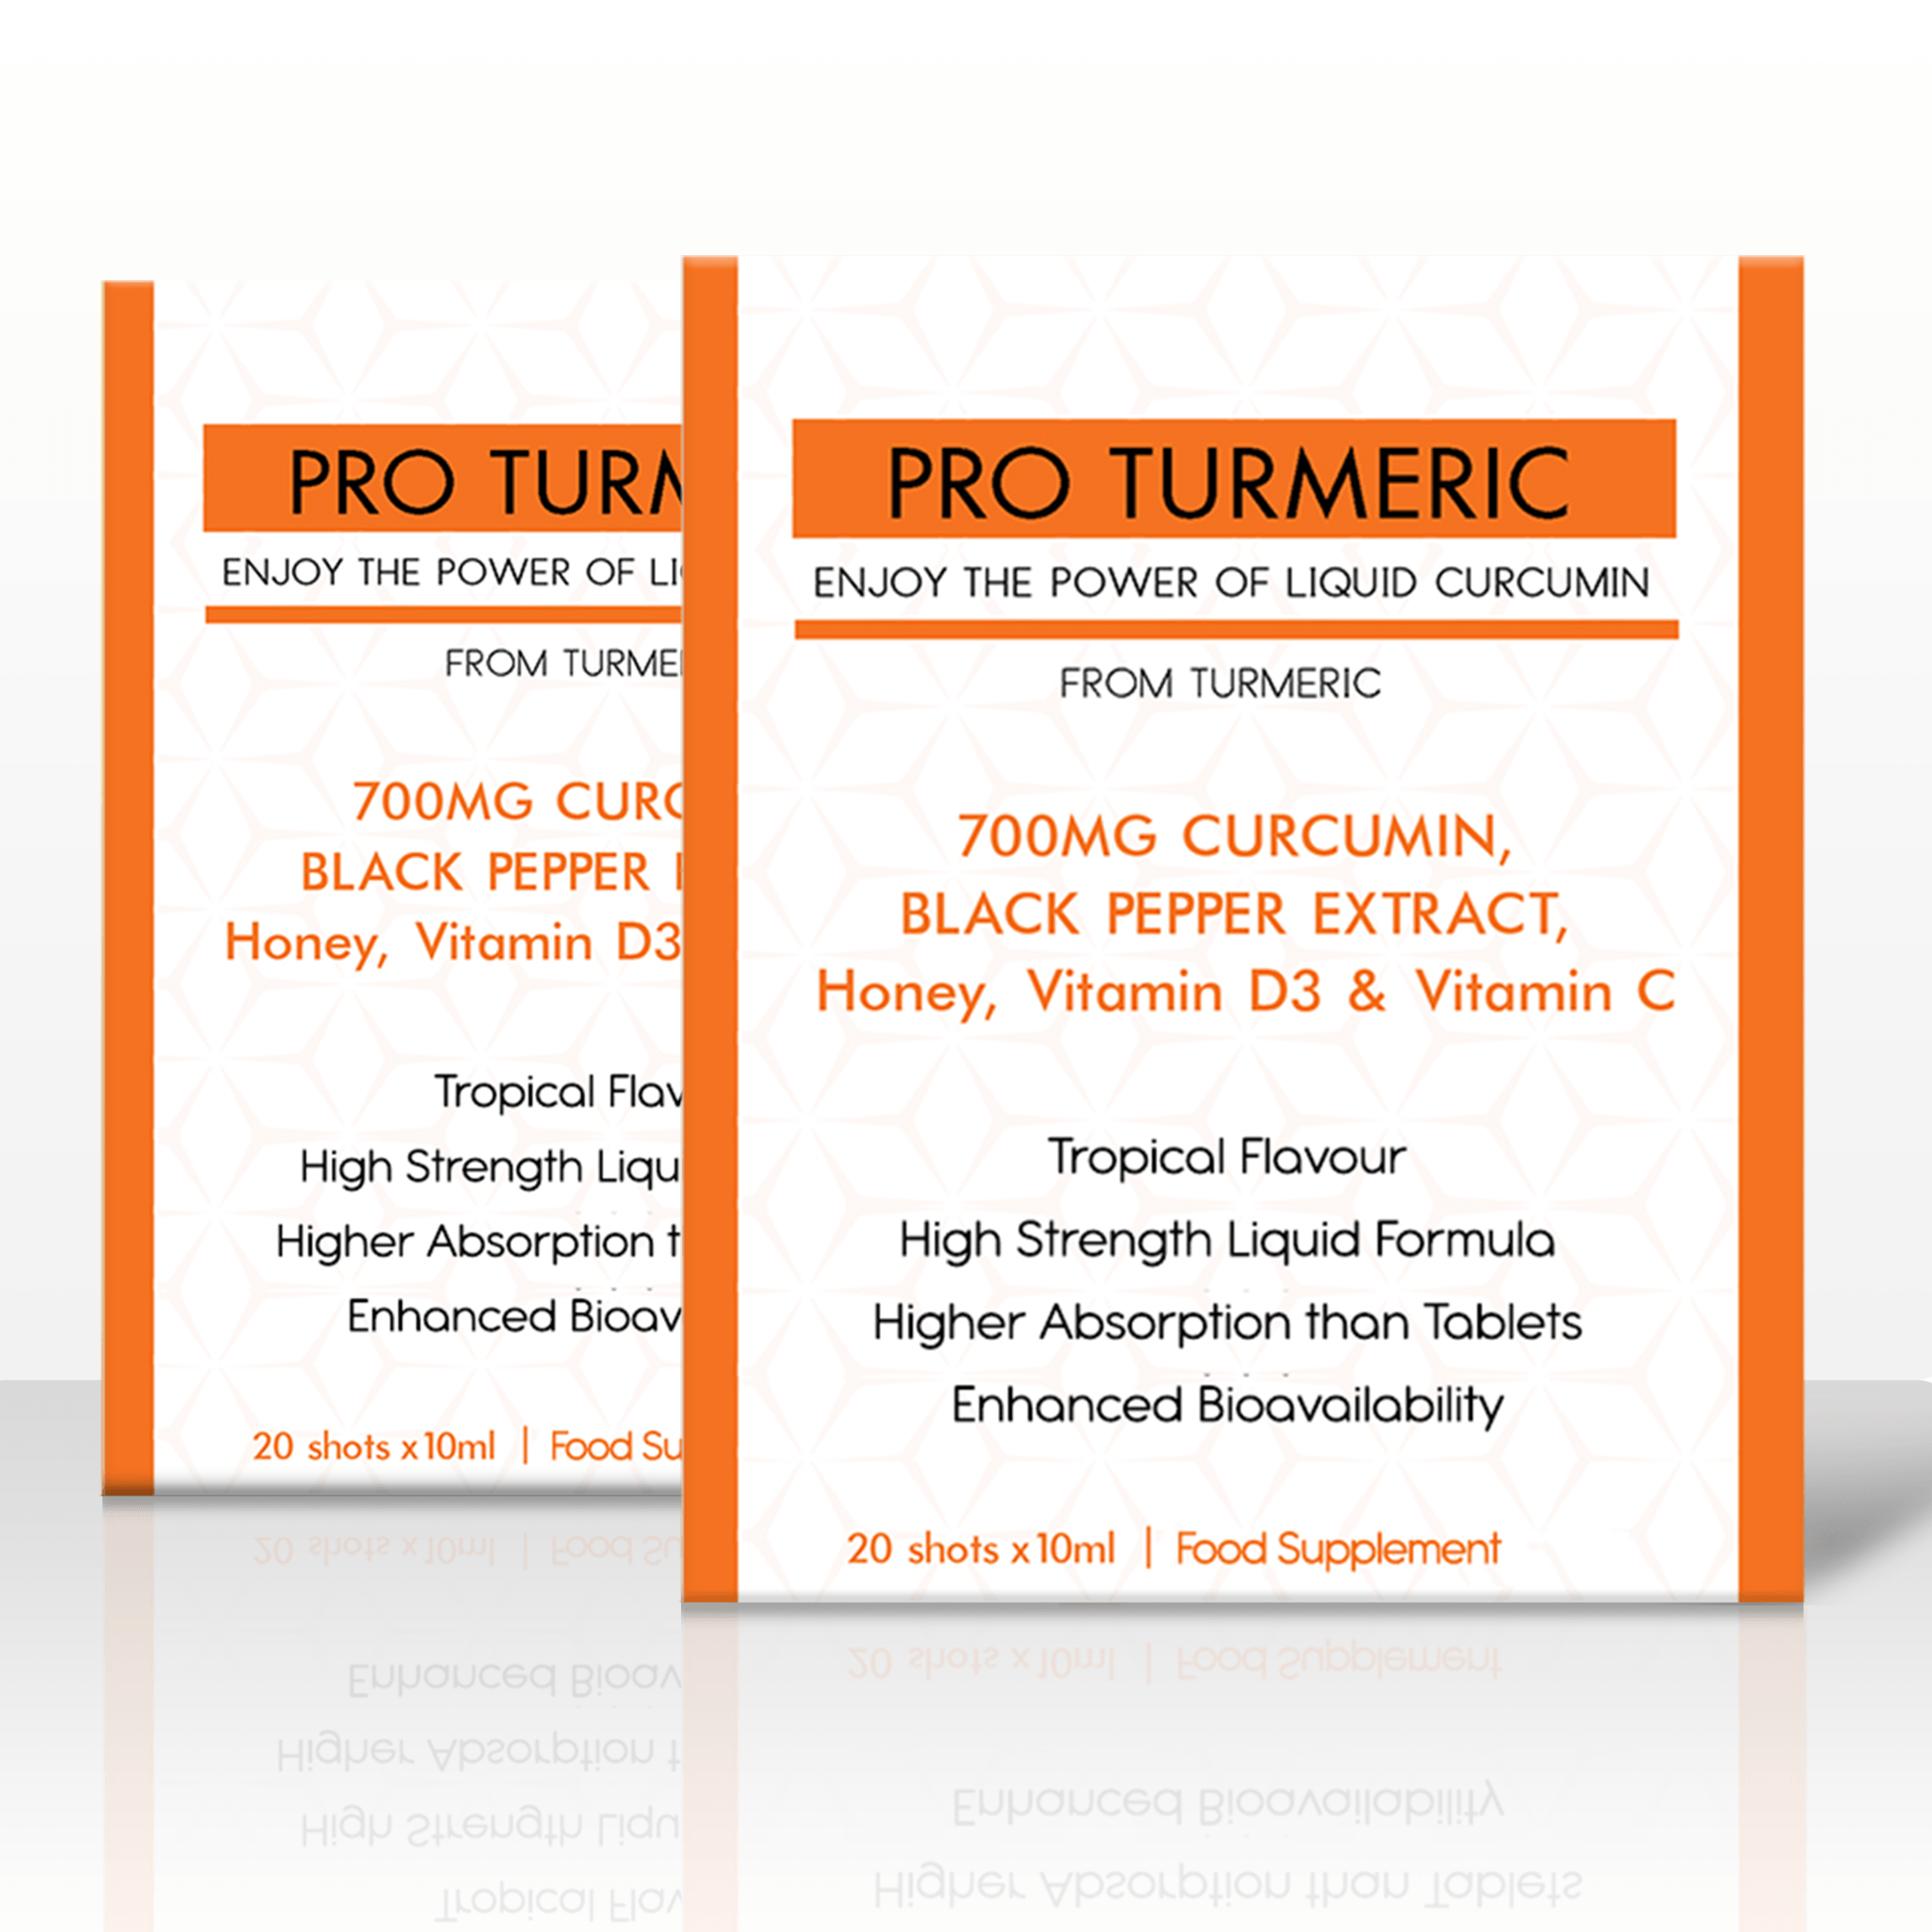 &lt;img src=&quot;pic.gif&quot; alt=&quot;Revitalize Your Body with Pro Turmeric Shots - Elevate Your Well-being&quot; /&gt;